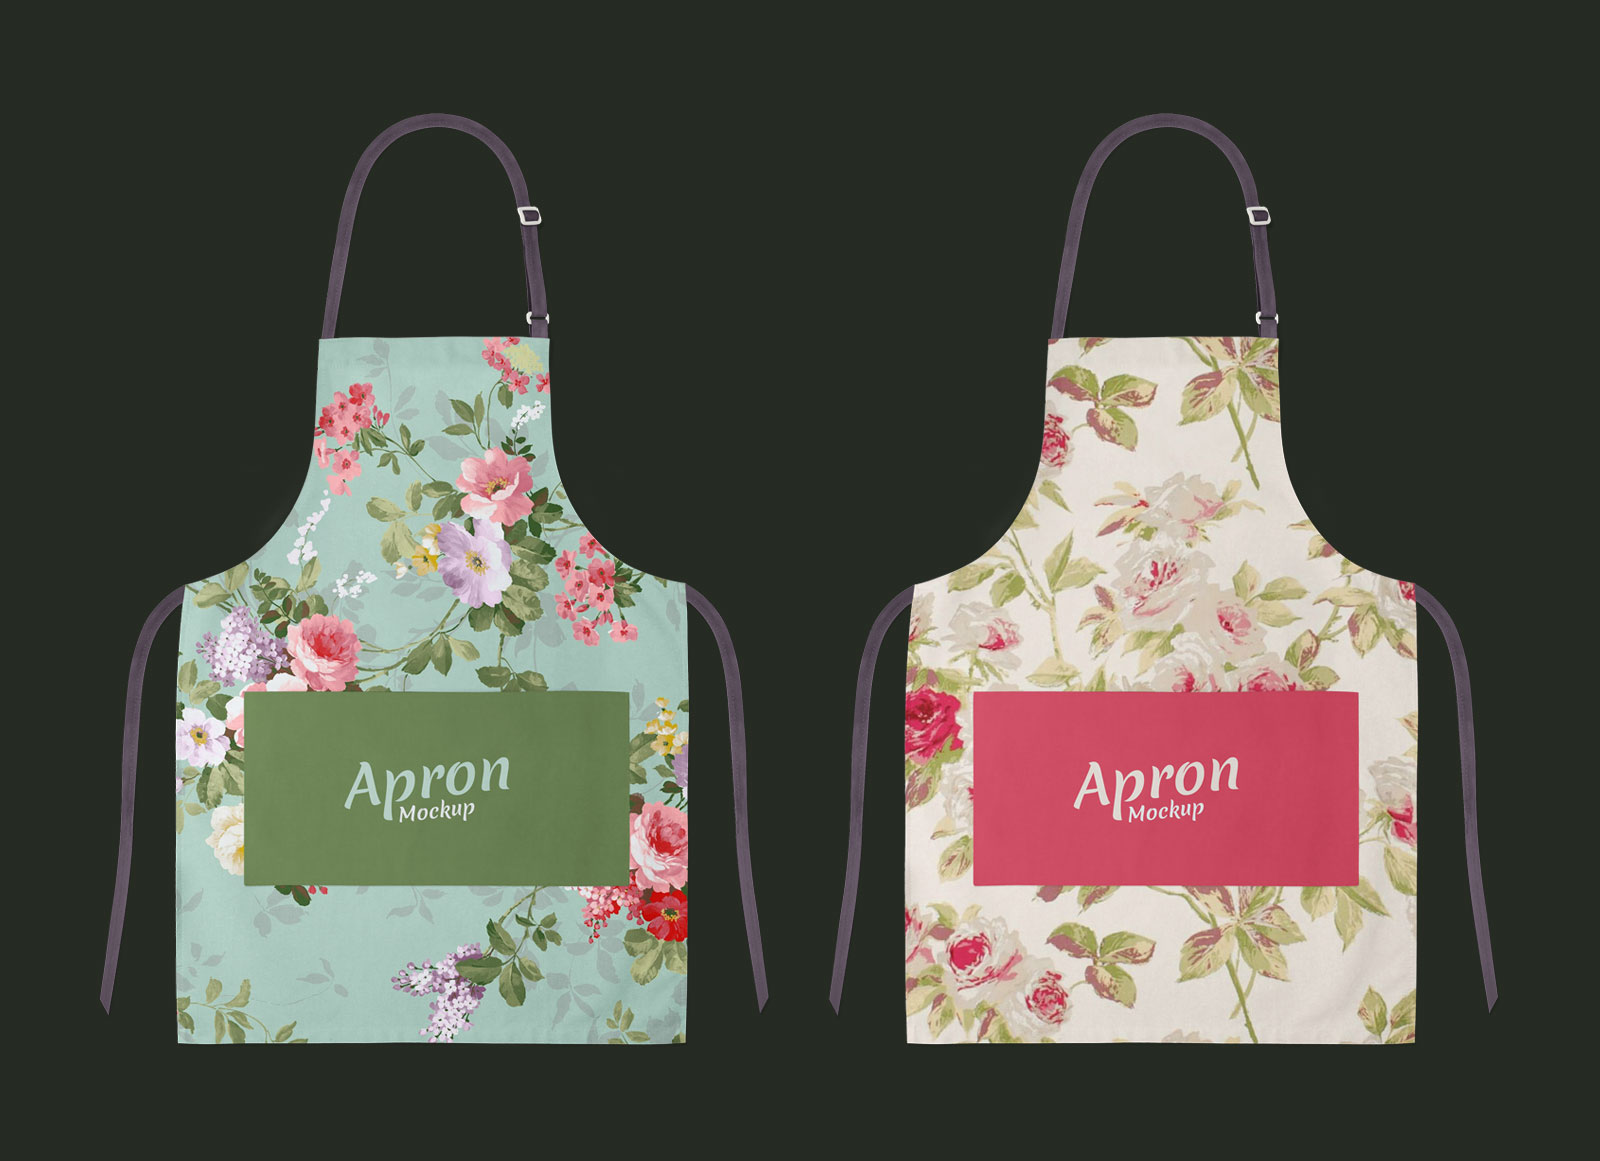 Download 26+ Apron Mockup Psd Free PNG Yellowimages - Free PSD ...